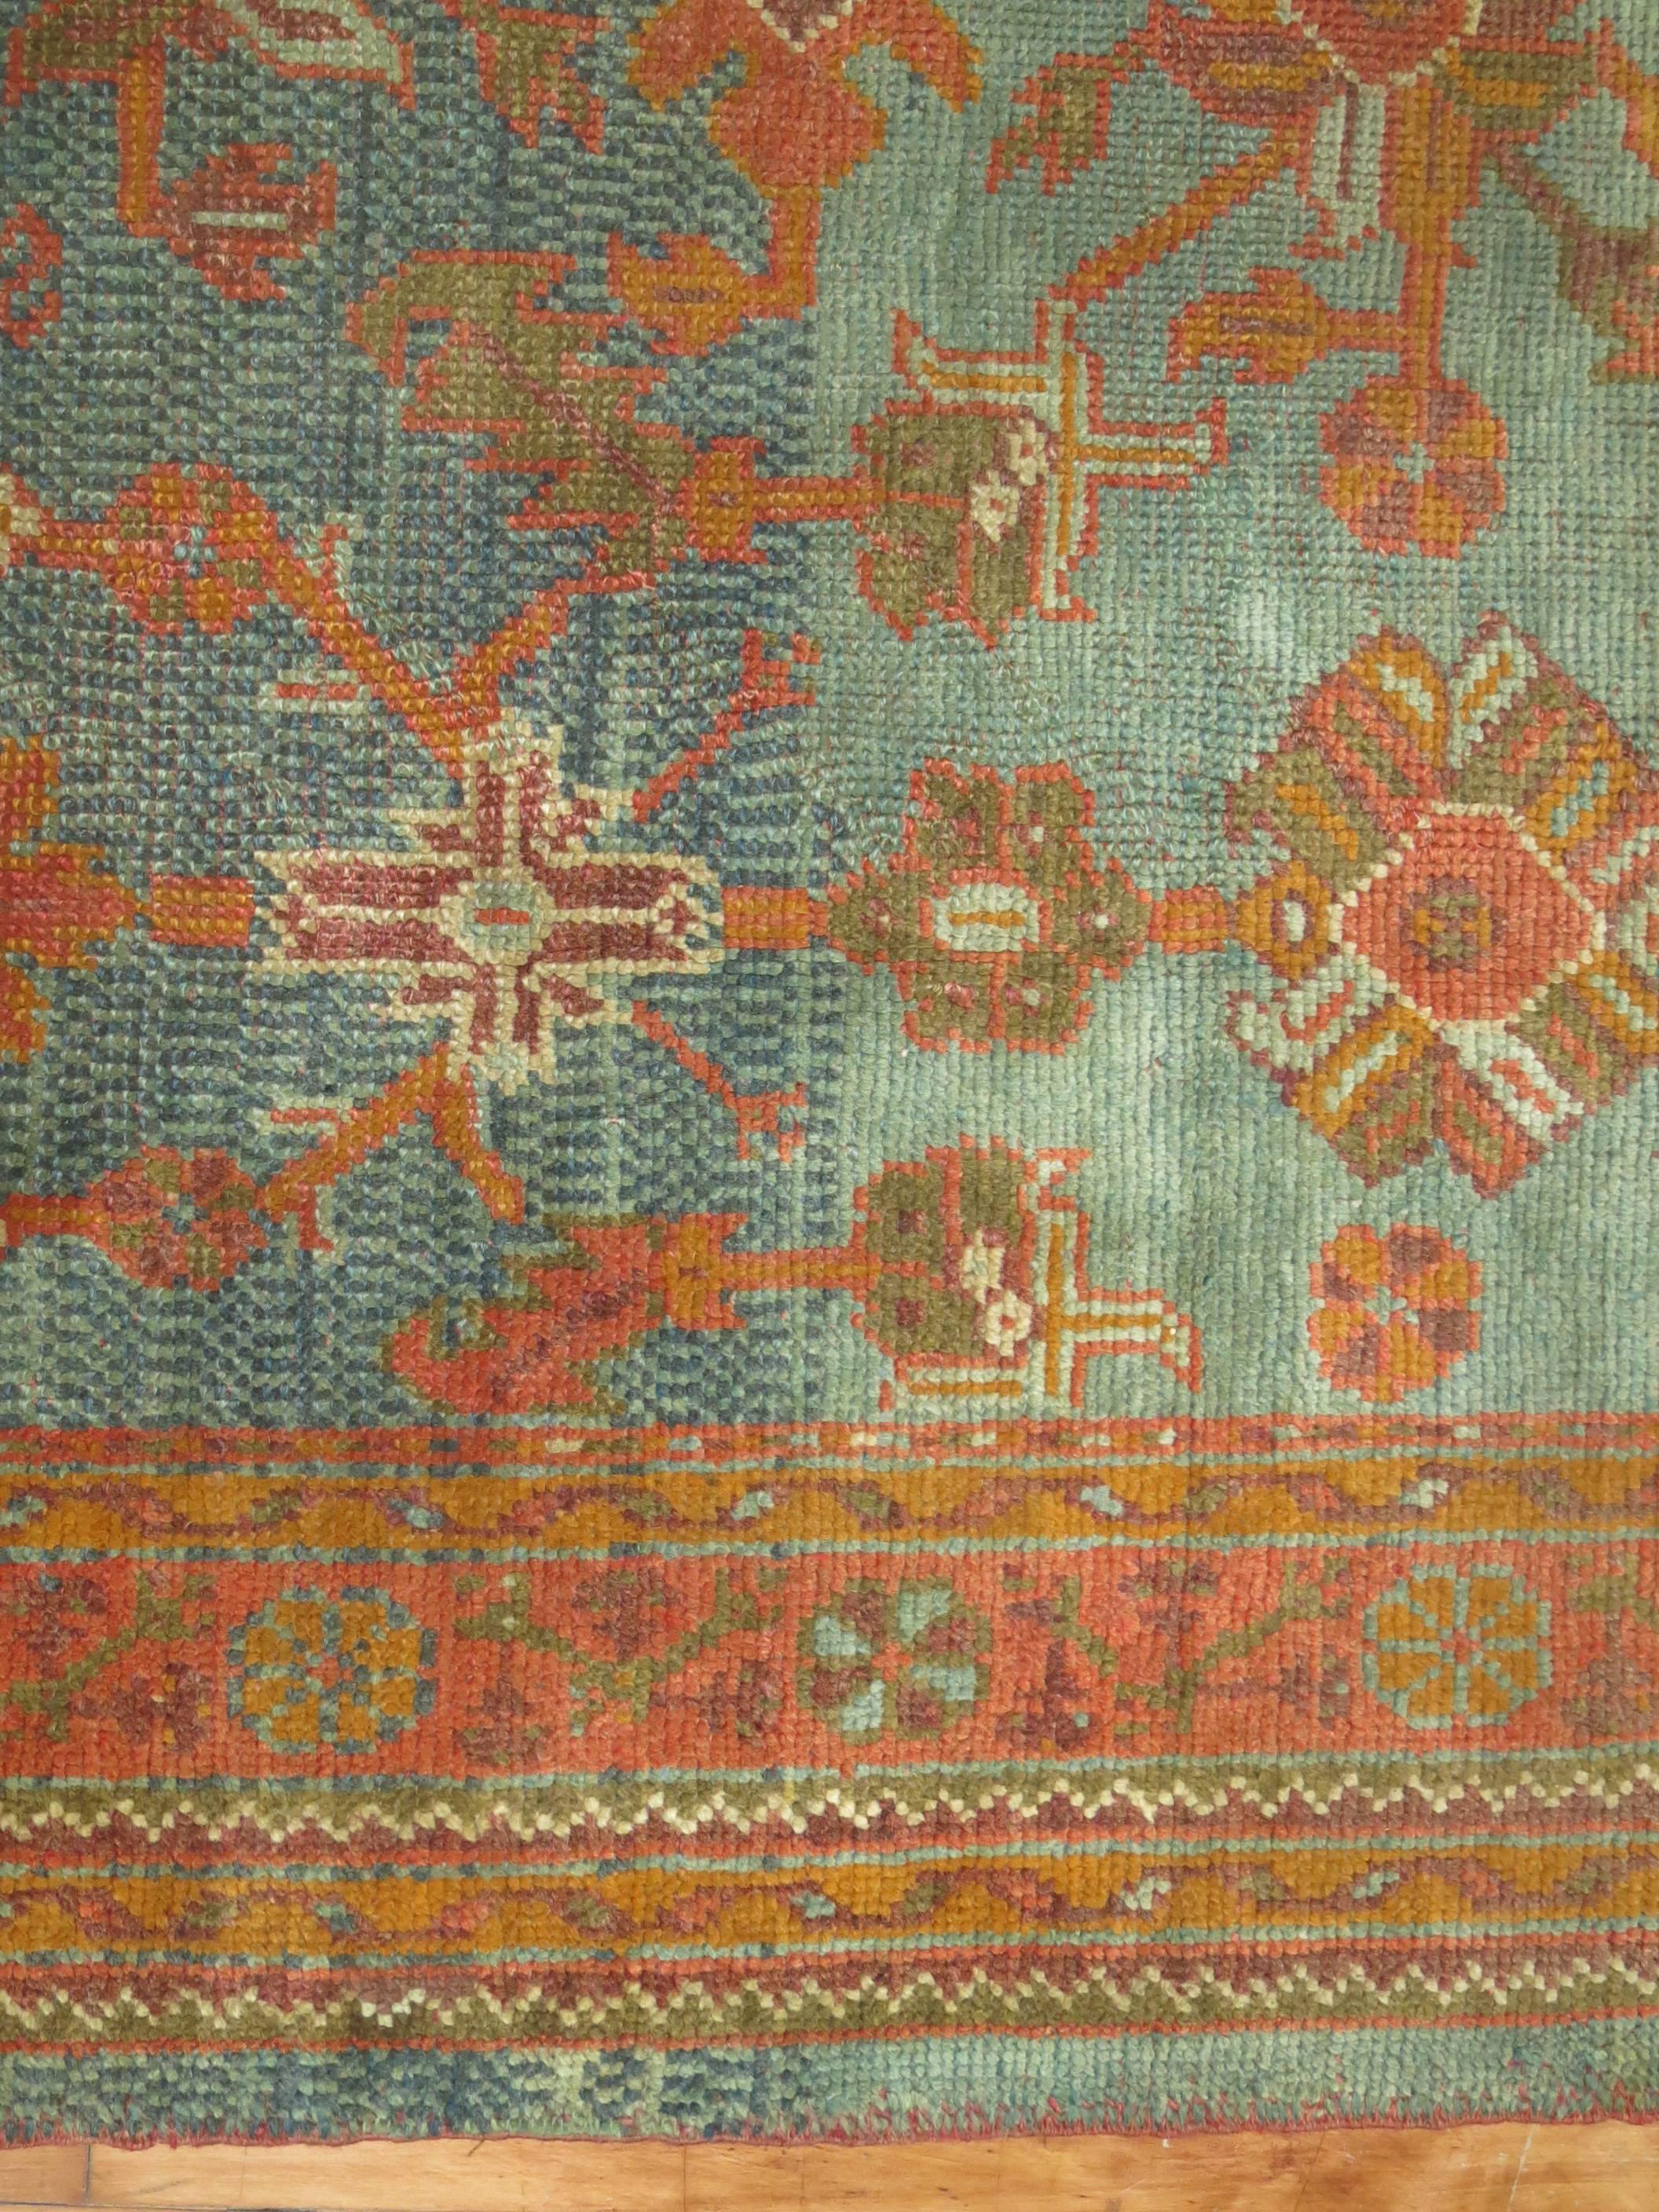 Hand-Knotted Green Orange Antique Oushak Square Rug